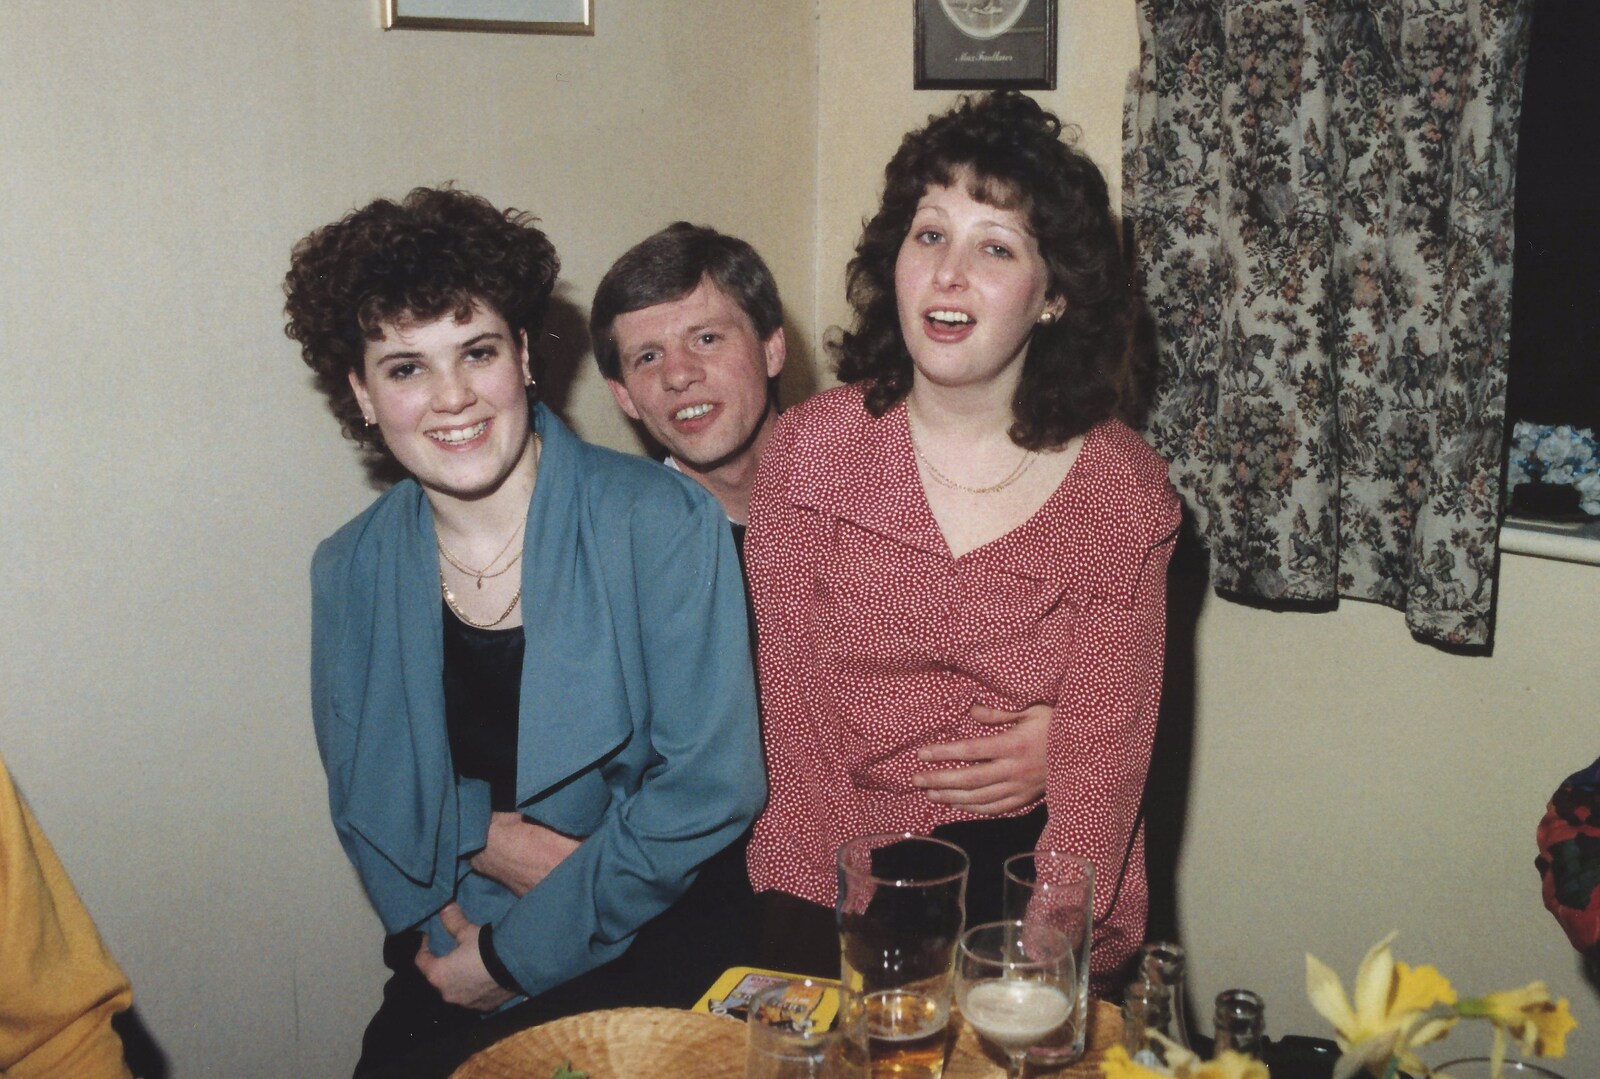 BPCC Printec Reunion at The Brome Swan, Suffolk - 20th February 1991: Steve-o with Kelly and Alison on his knee